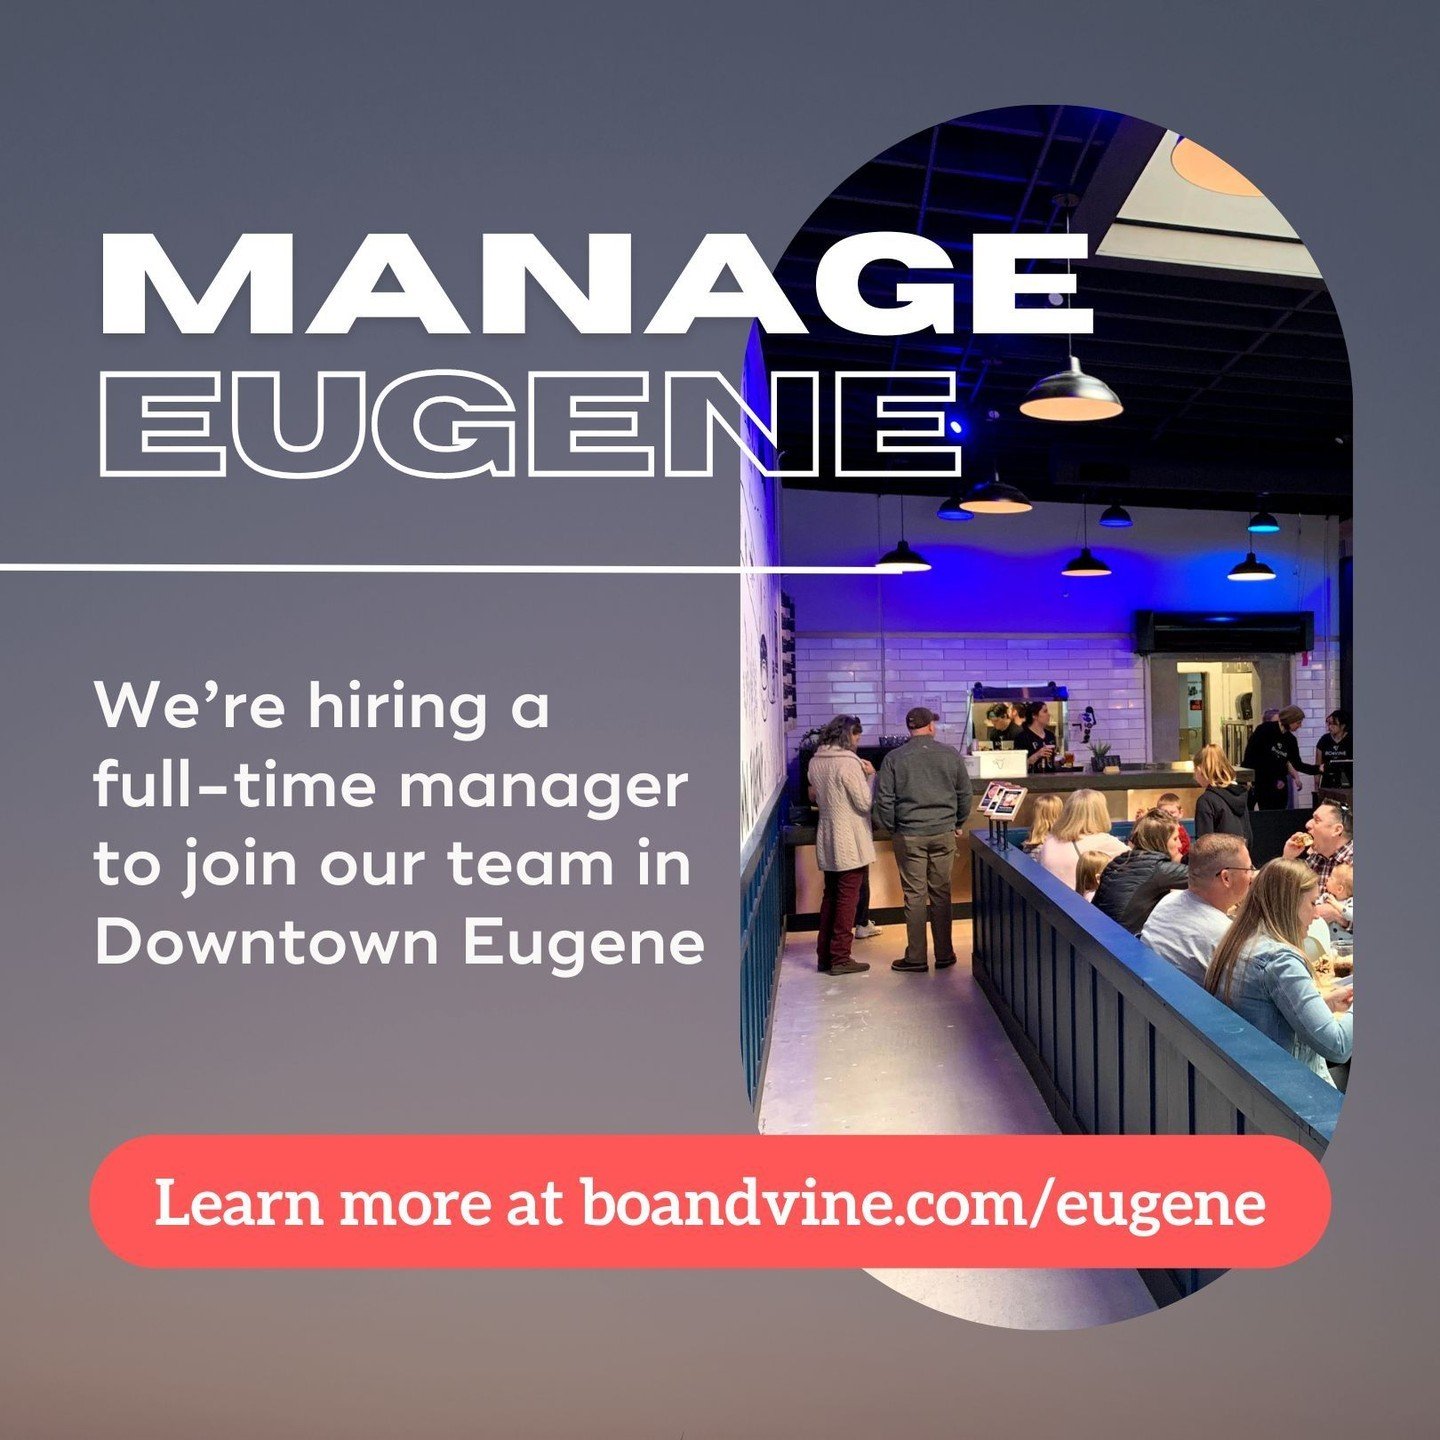 Our full-time manager position in downtown Eugene is now accepting applications. Visit boandvine.com/eugene to learn more and apply.
.
.
.
.
#OppInEugene #EugeneJobs #EugeneHiring #DowntownEugene #EugeneManagers #JobSearch #Careers #WorkInOregon #Hir